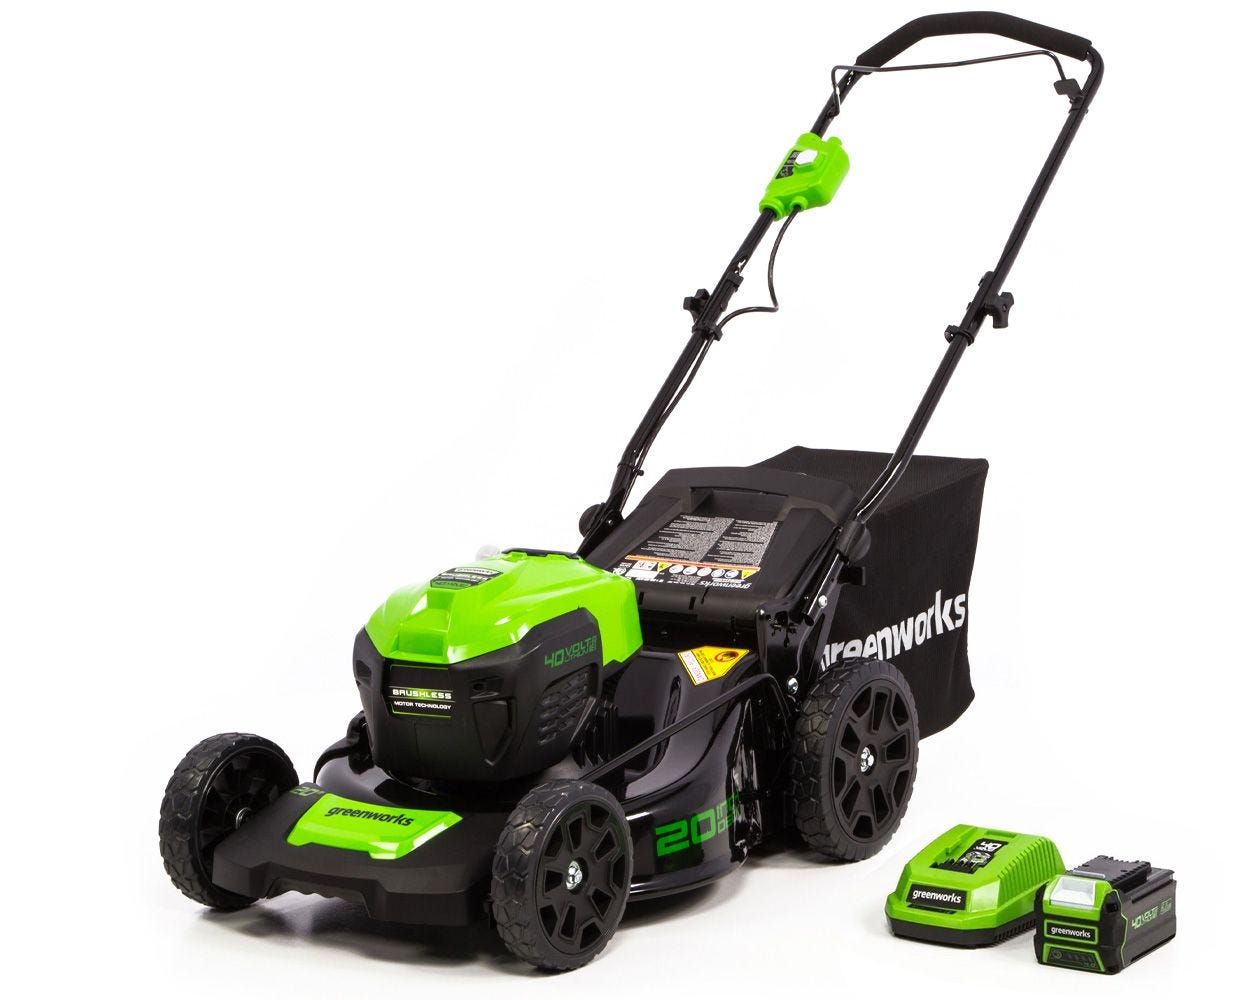 Greenworks 40V 20" Brushless Push Lawn Mower with 4.0 Ah Battery & Quick Charger 2516302VT - image 1 of 13